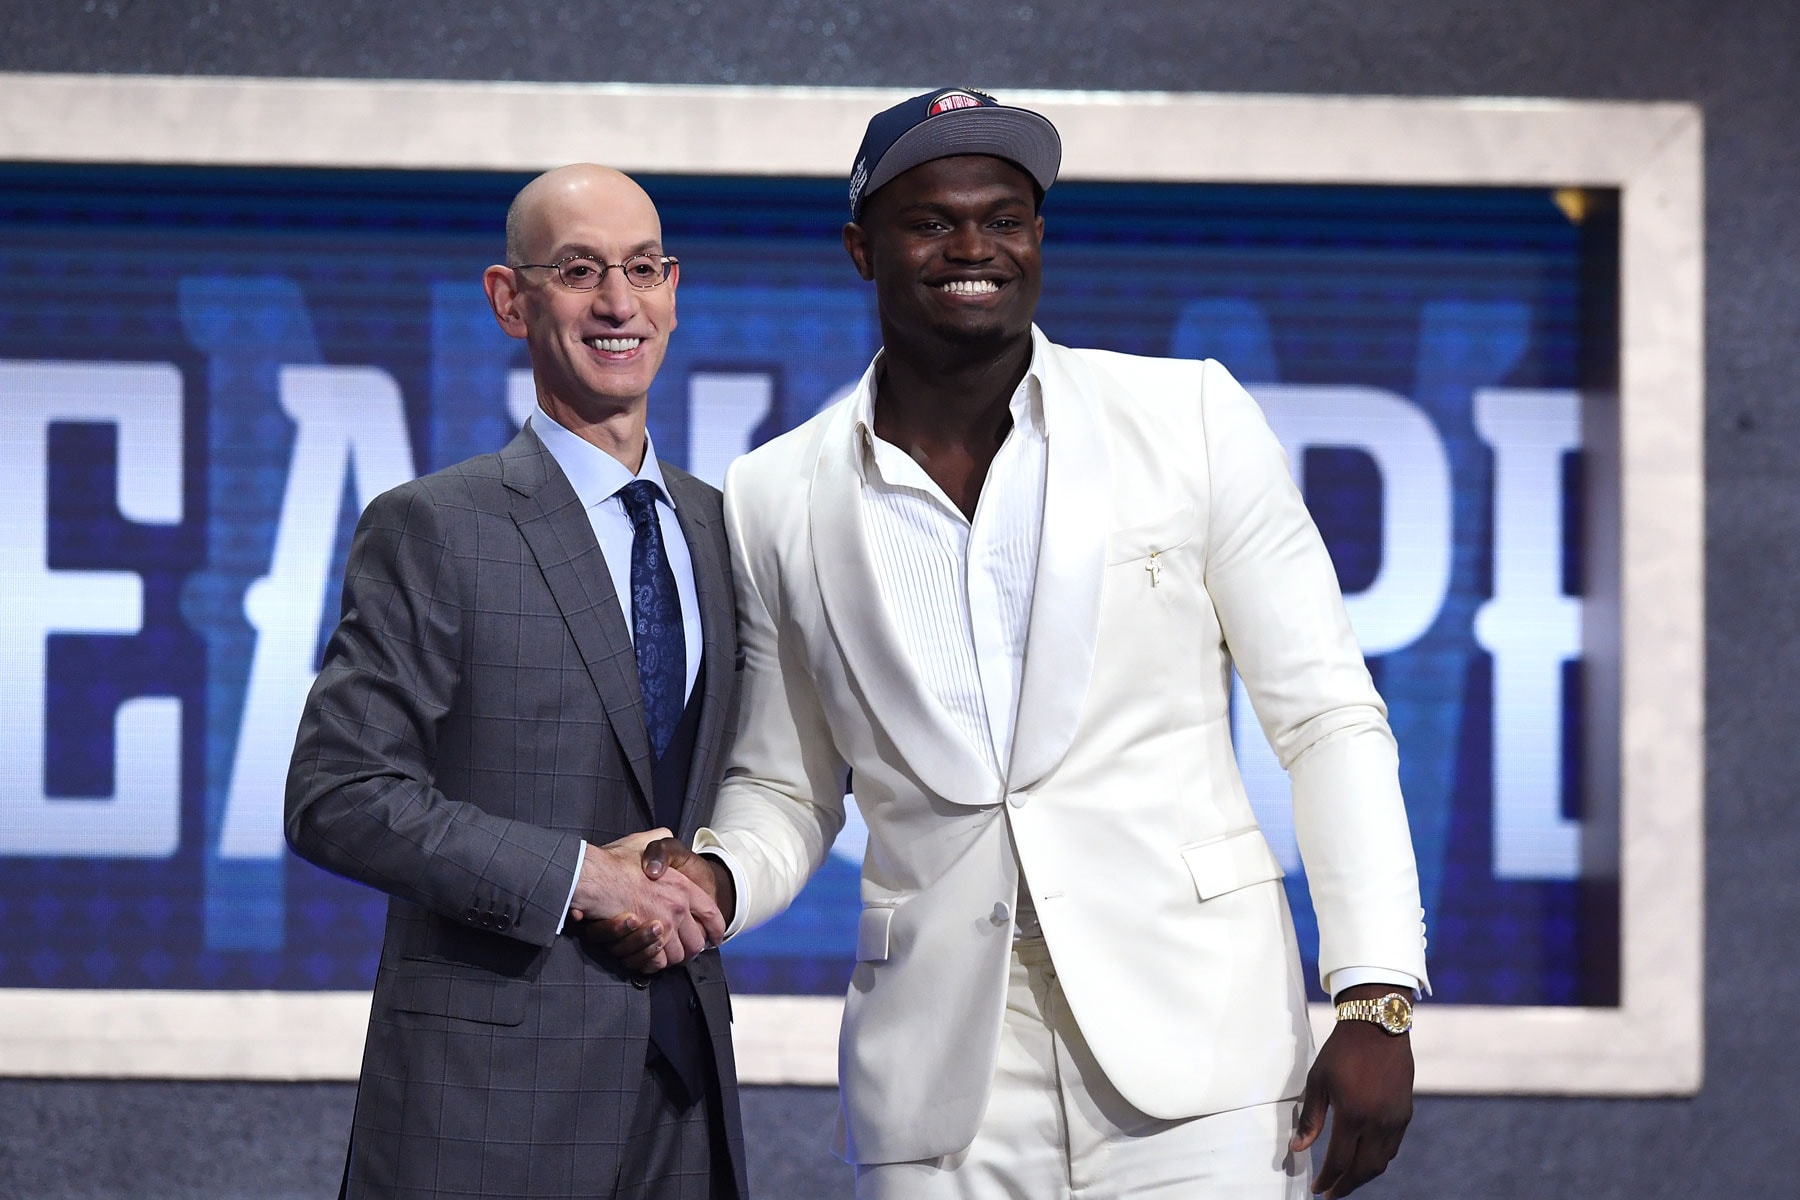 Zion Williamson Drafted No. 1 by the Pelicans full 2019 NBA Draft basketball duke university 